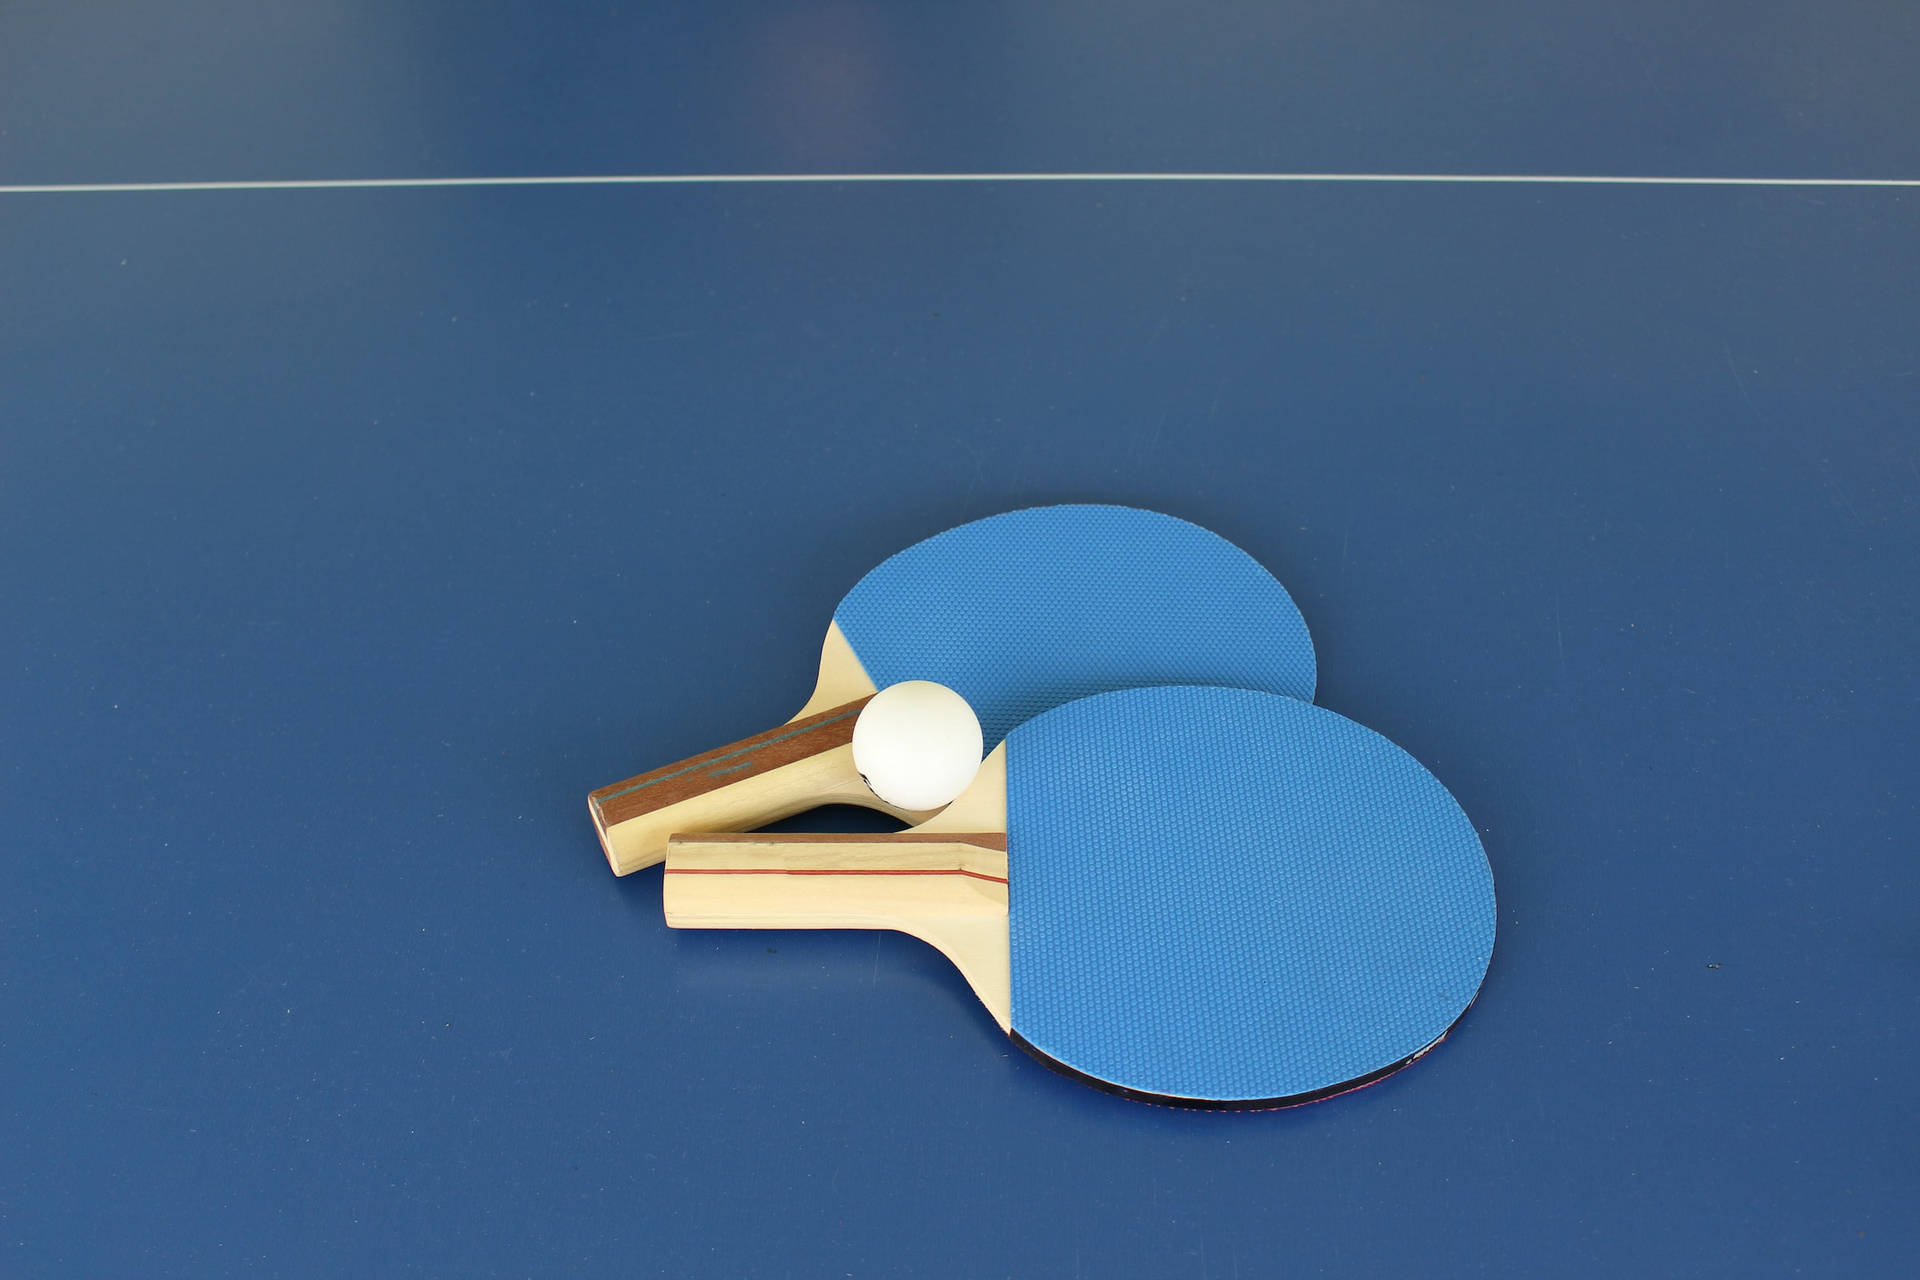 Ping Pong Match Ready Background